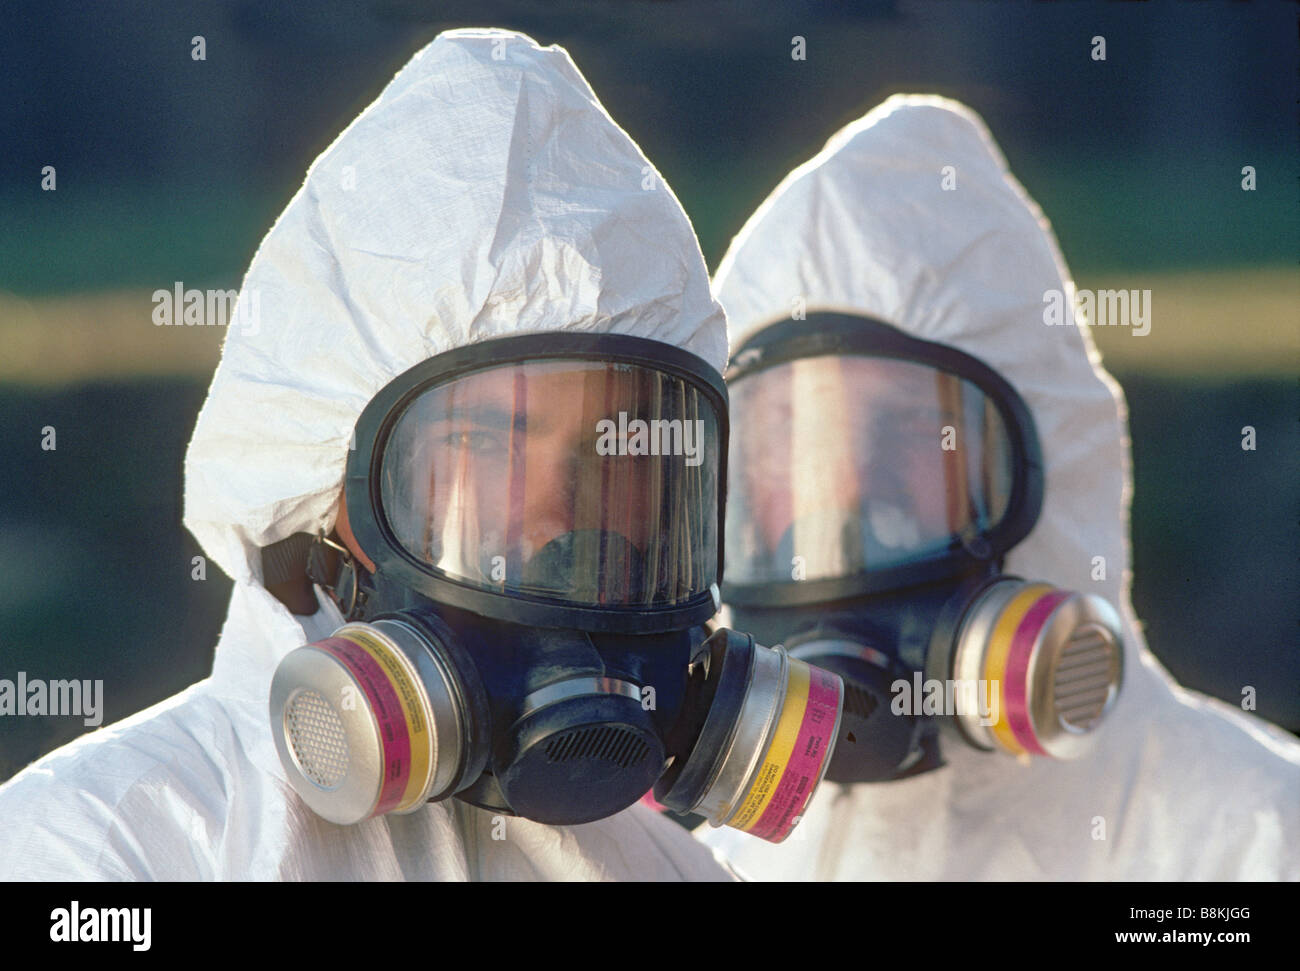 Hazmat High Resolution Stock Photography and Images - Alamy